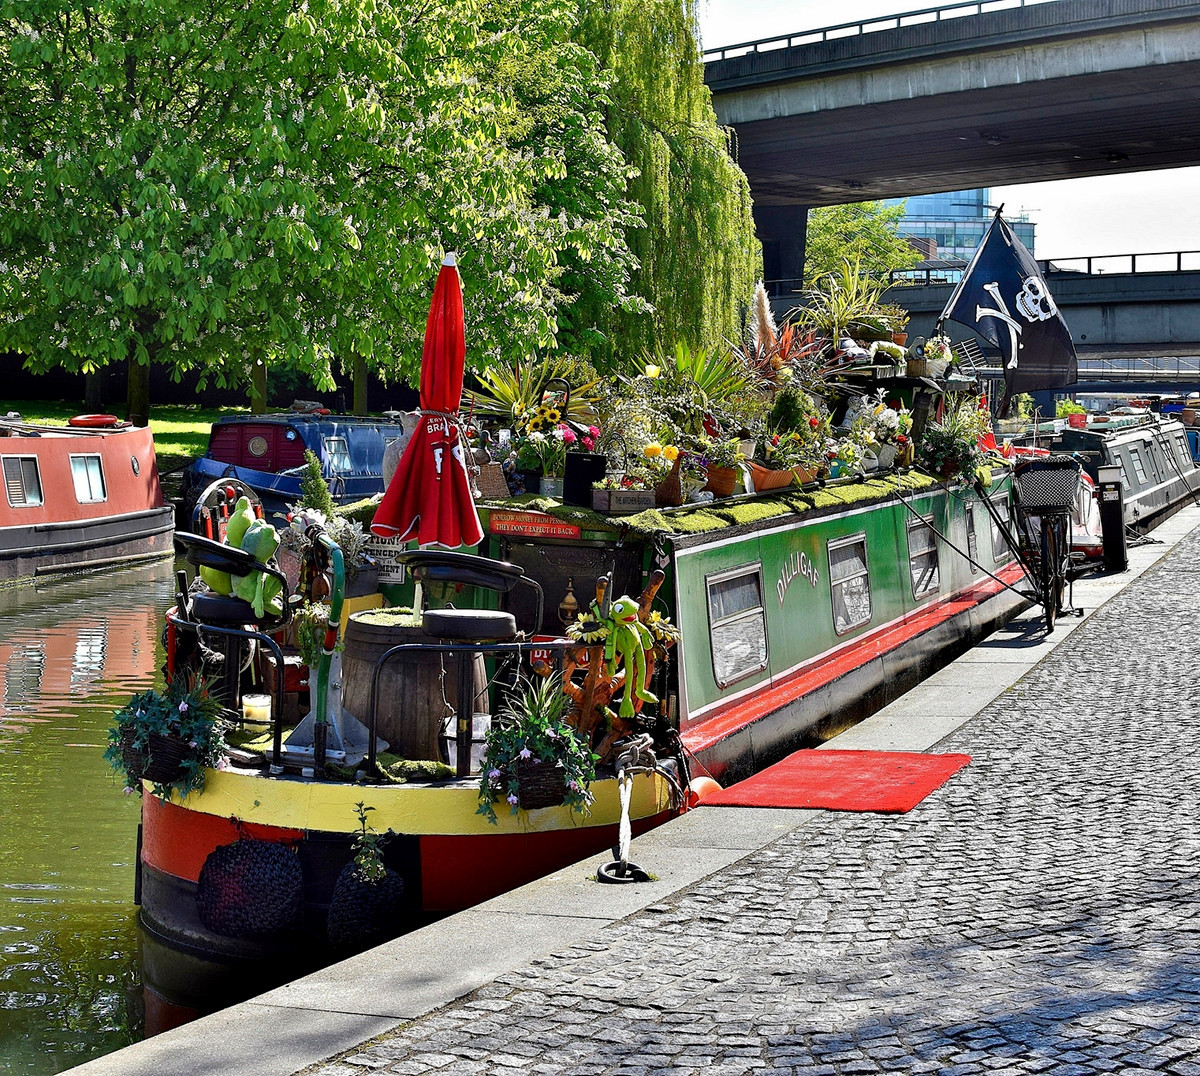 Narrowboats at the Paddington branch of the Grand Union Canal